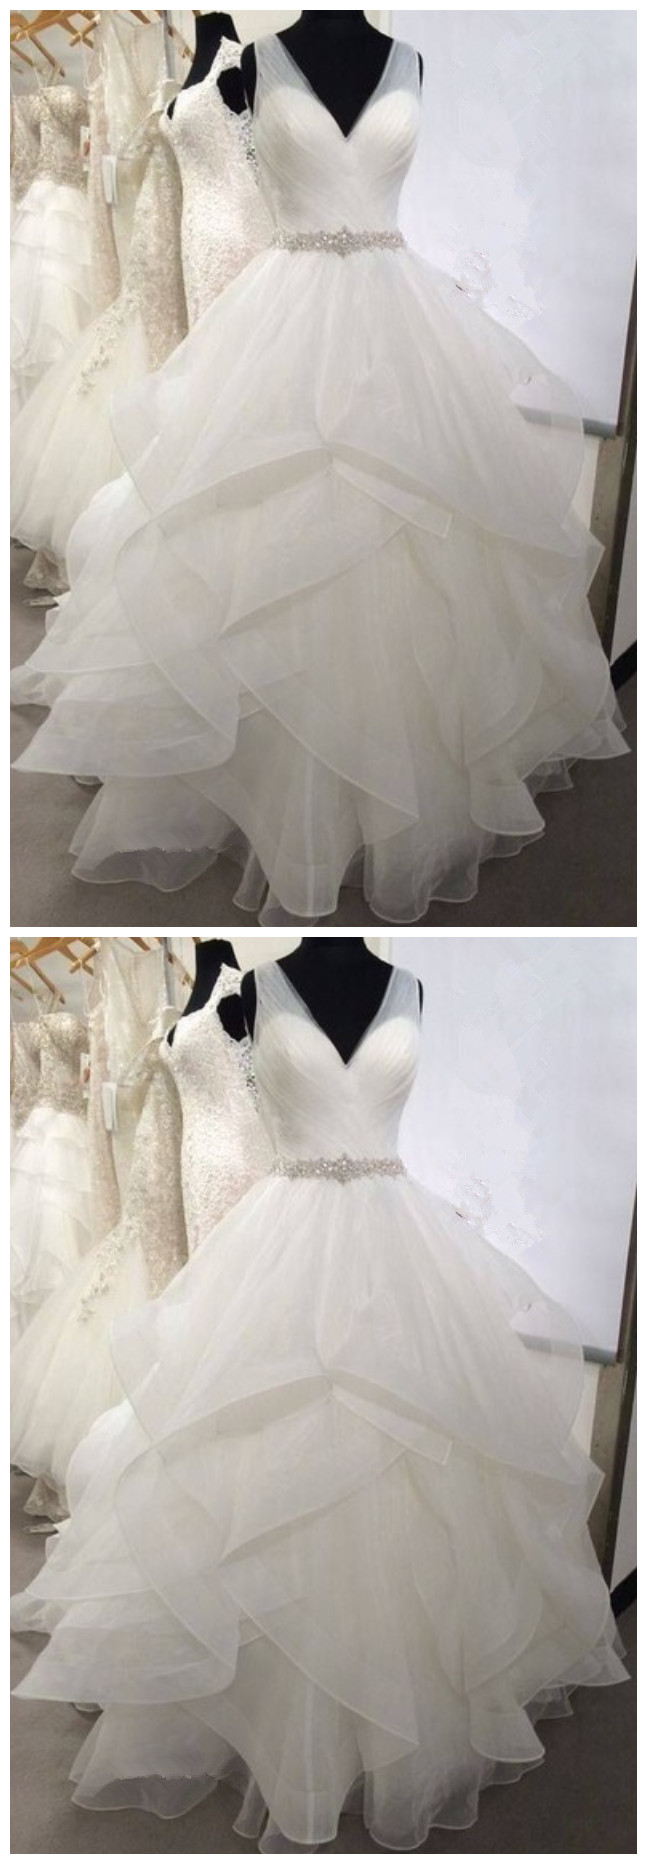 Stylish Dress Fashion V Neck Tiered Tulle Ball Gown Wedding Dresses